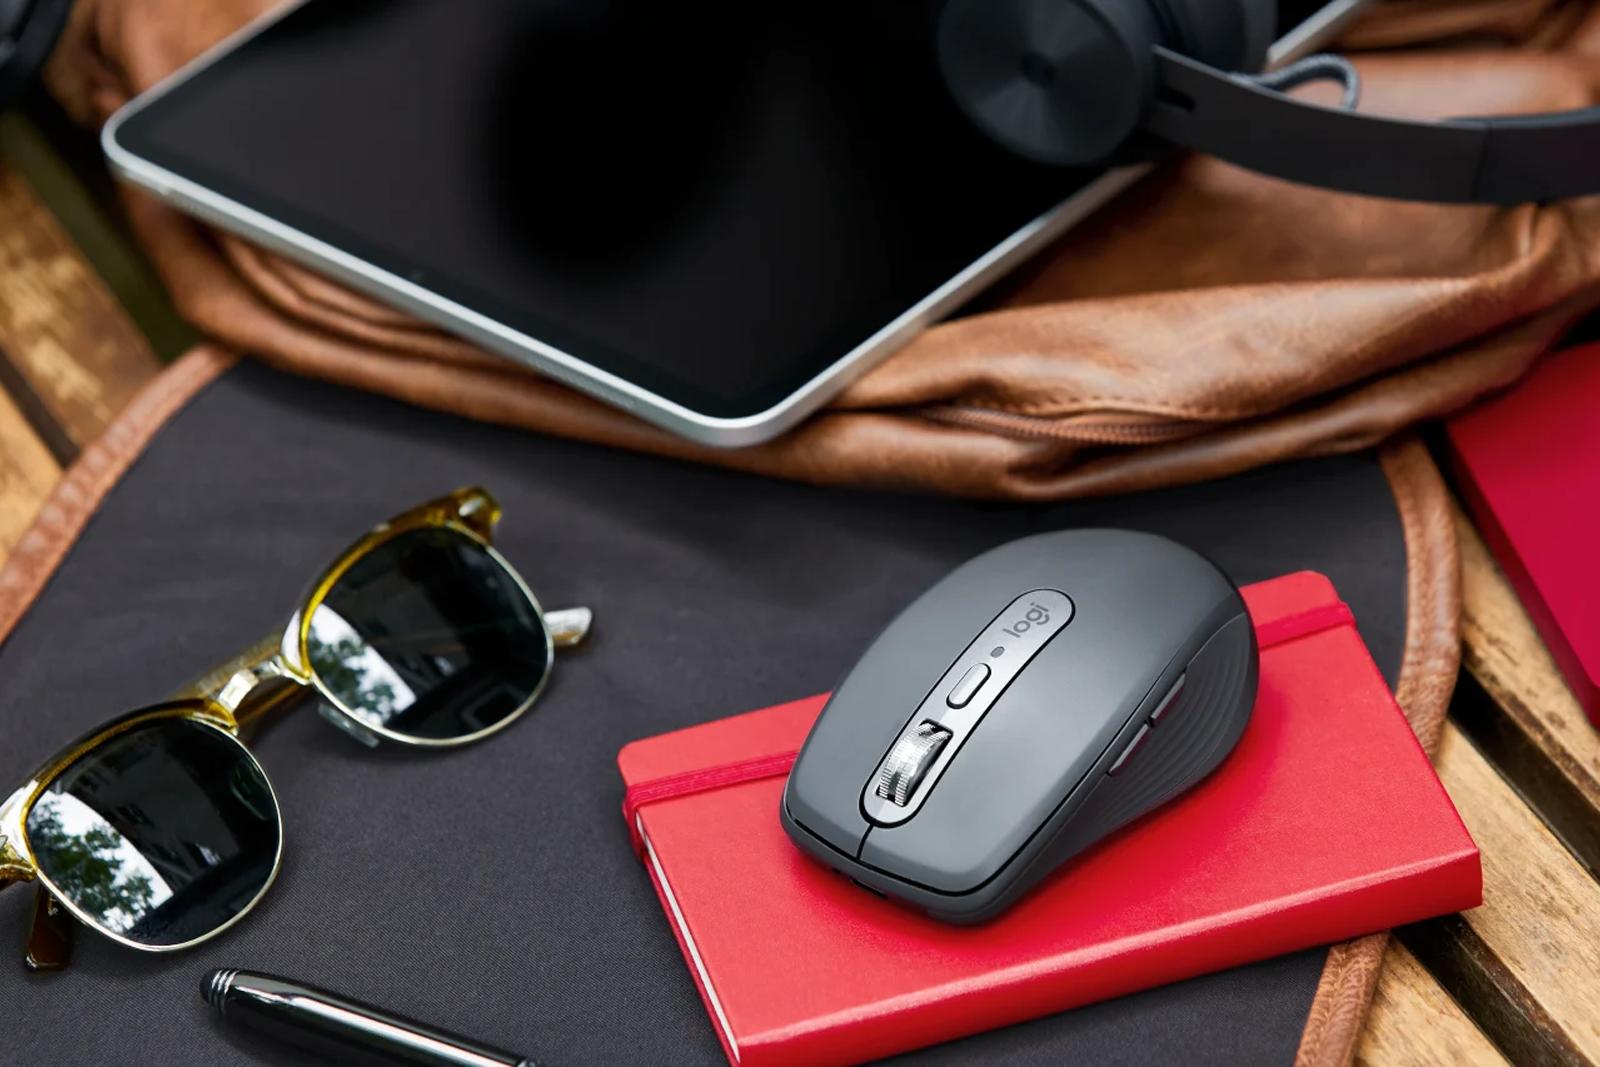 Upgrade your home office with these superb little Logitech mice at Curry's PC World photo 3